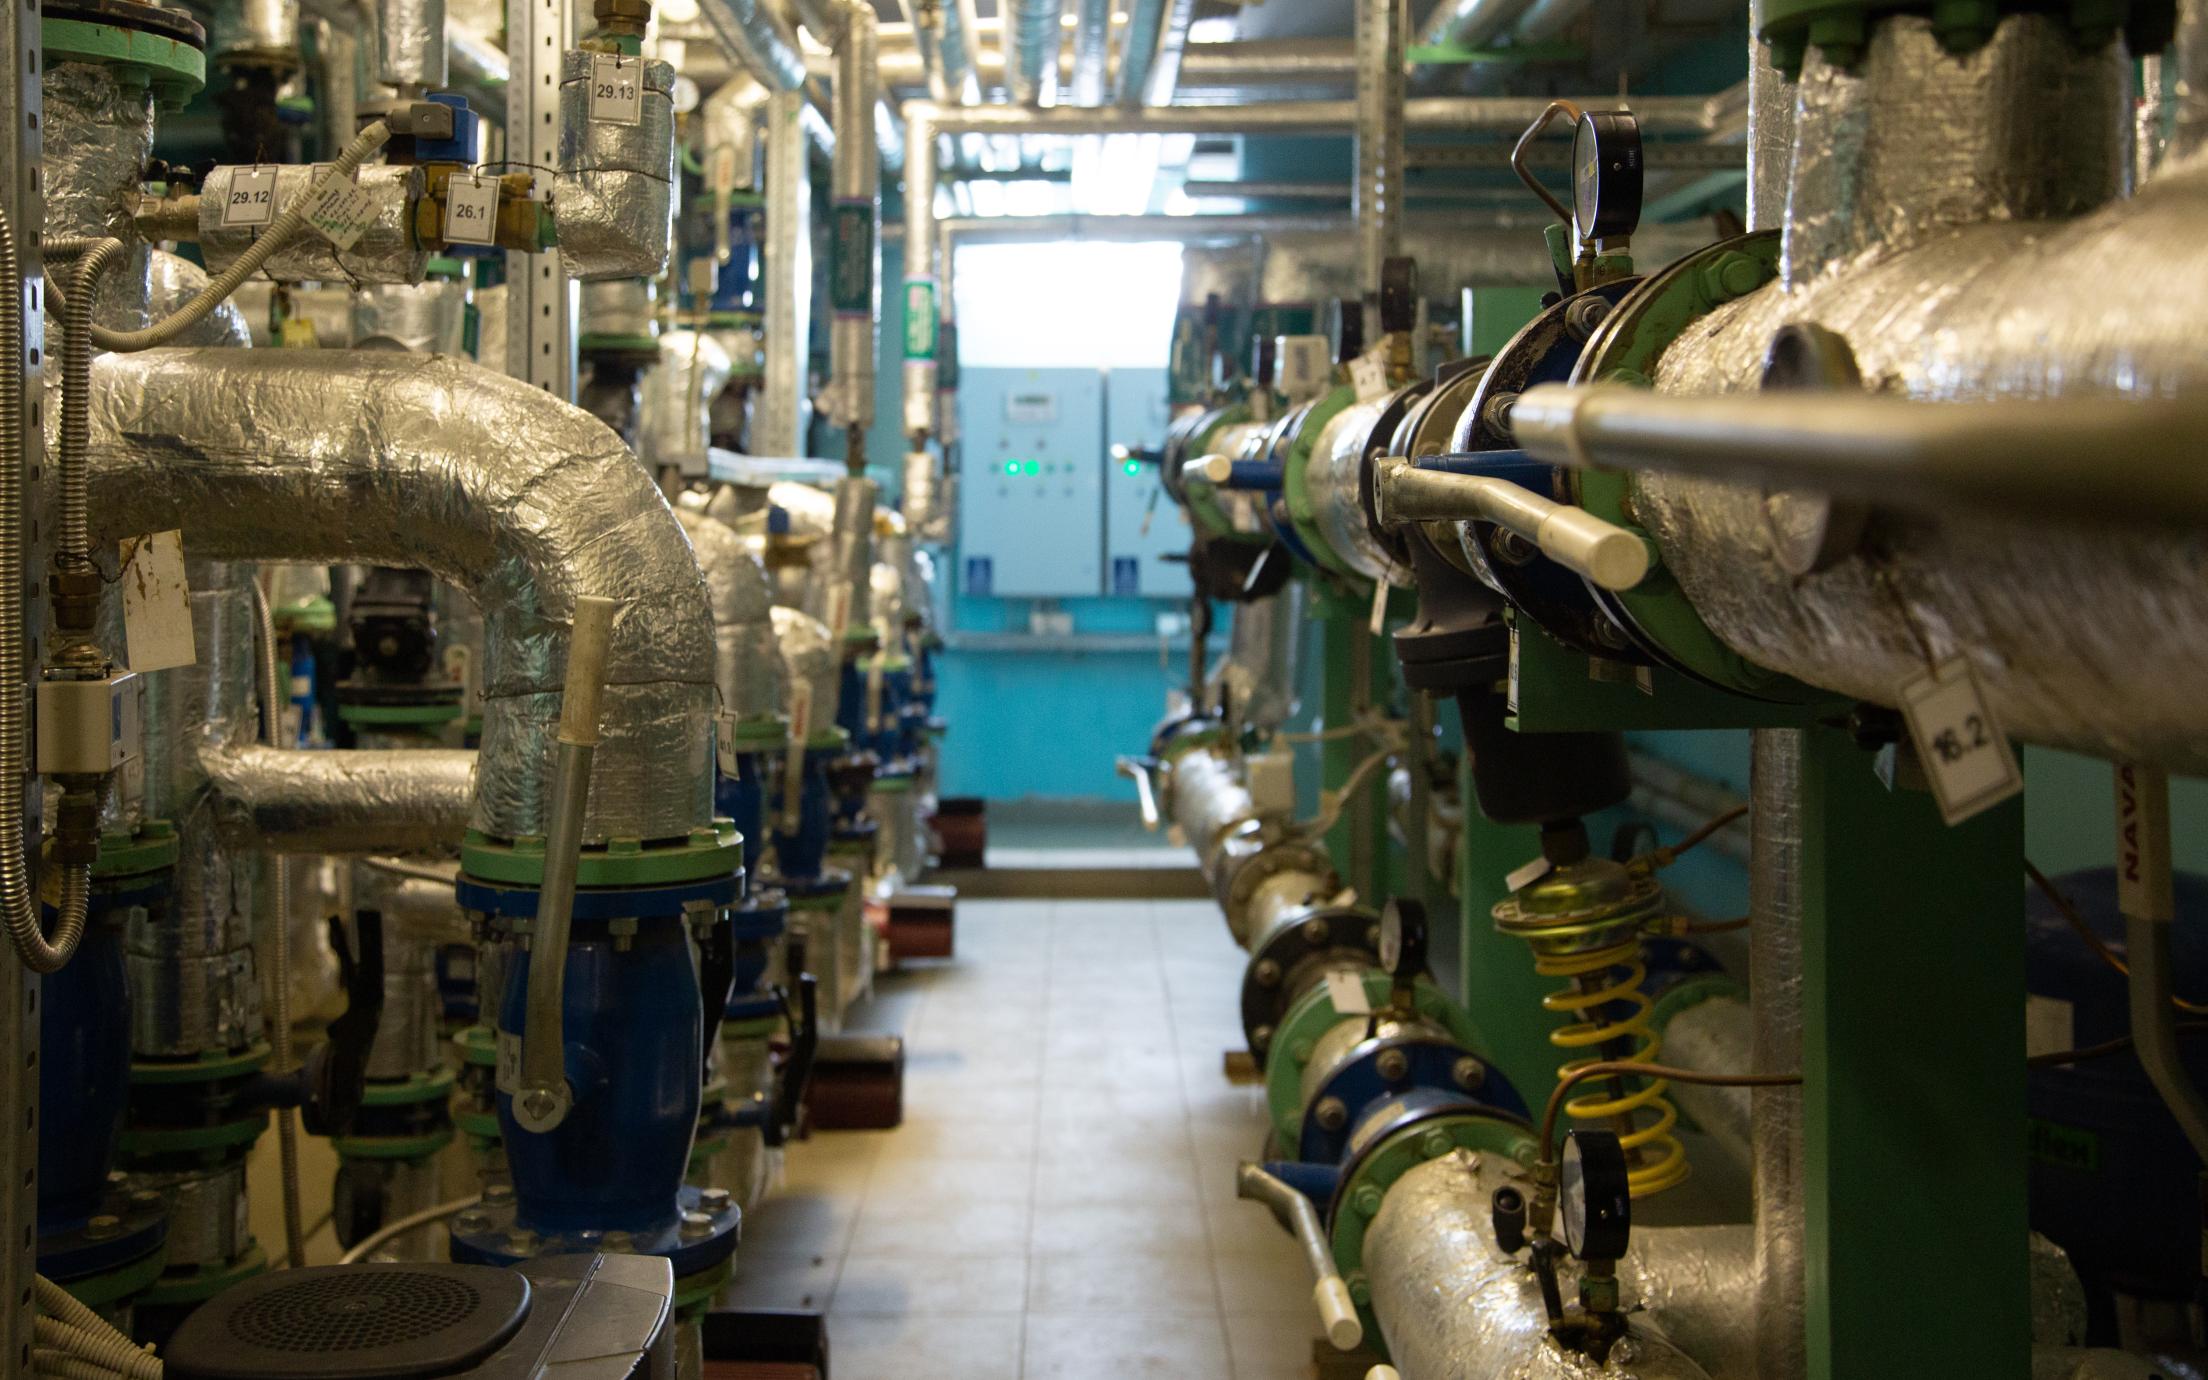 A hallway with pipes on either side in a utility plant